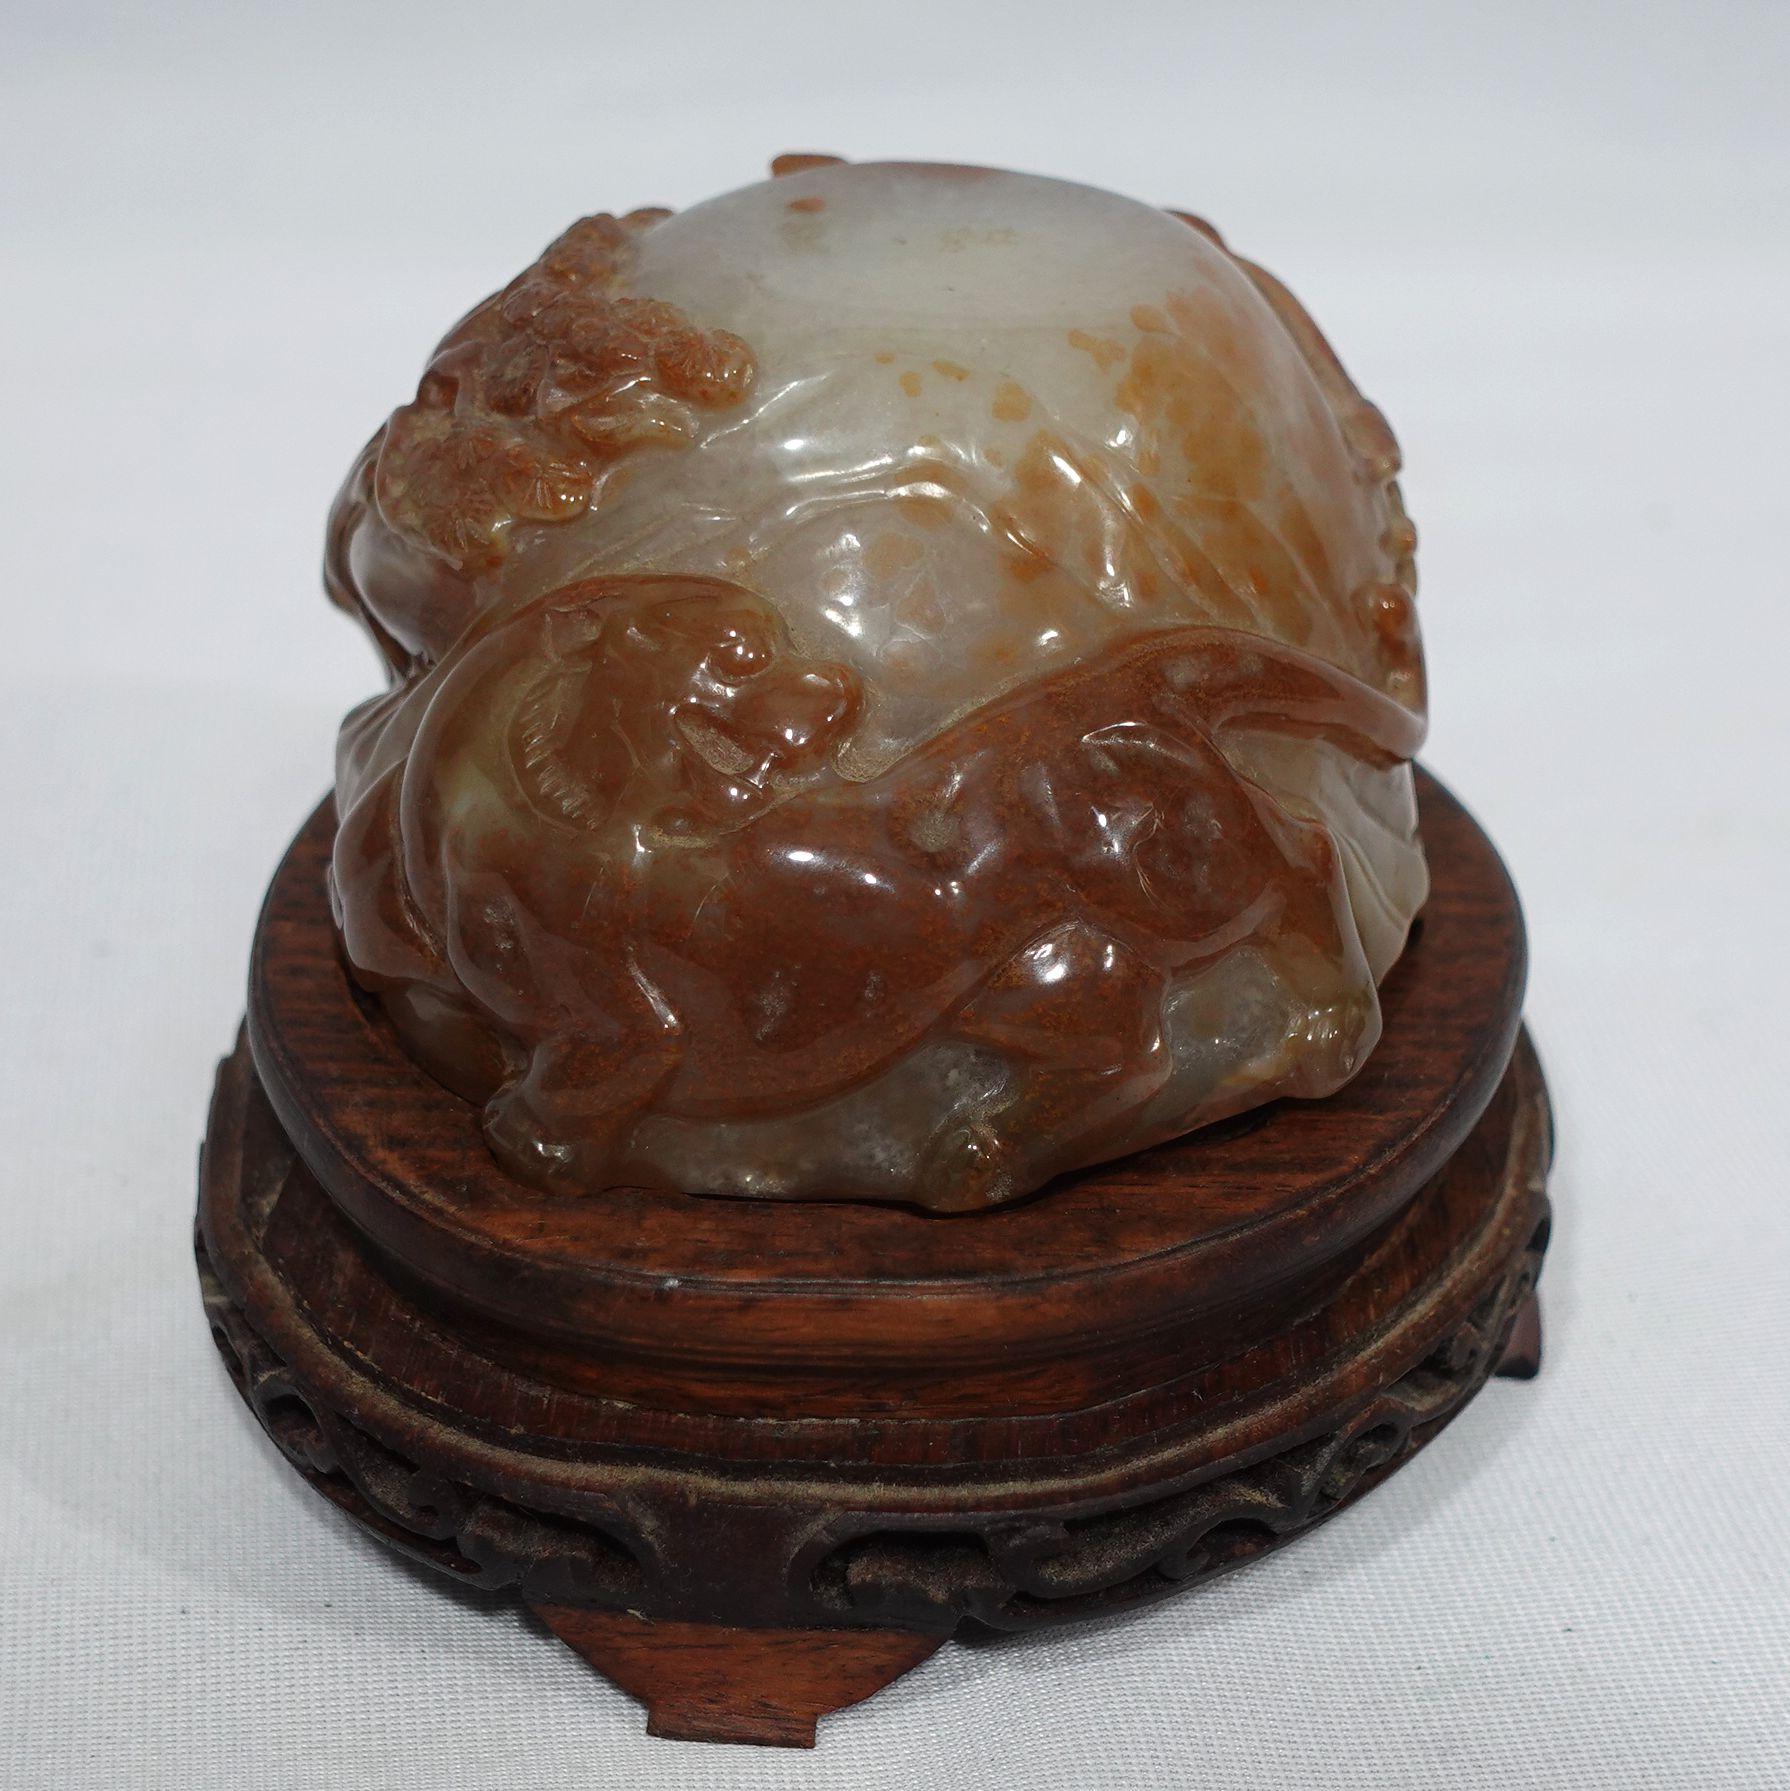 A fine and beautiful Carved Agate Animal Group depicts trees, a Tiger, and a Baffulor resting on a fitted wooden base. A large and heavy piece.
Dimension: 4.5